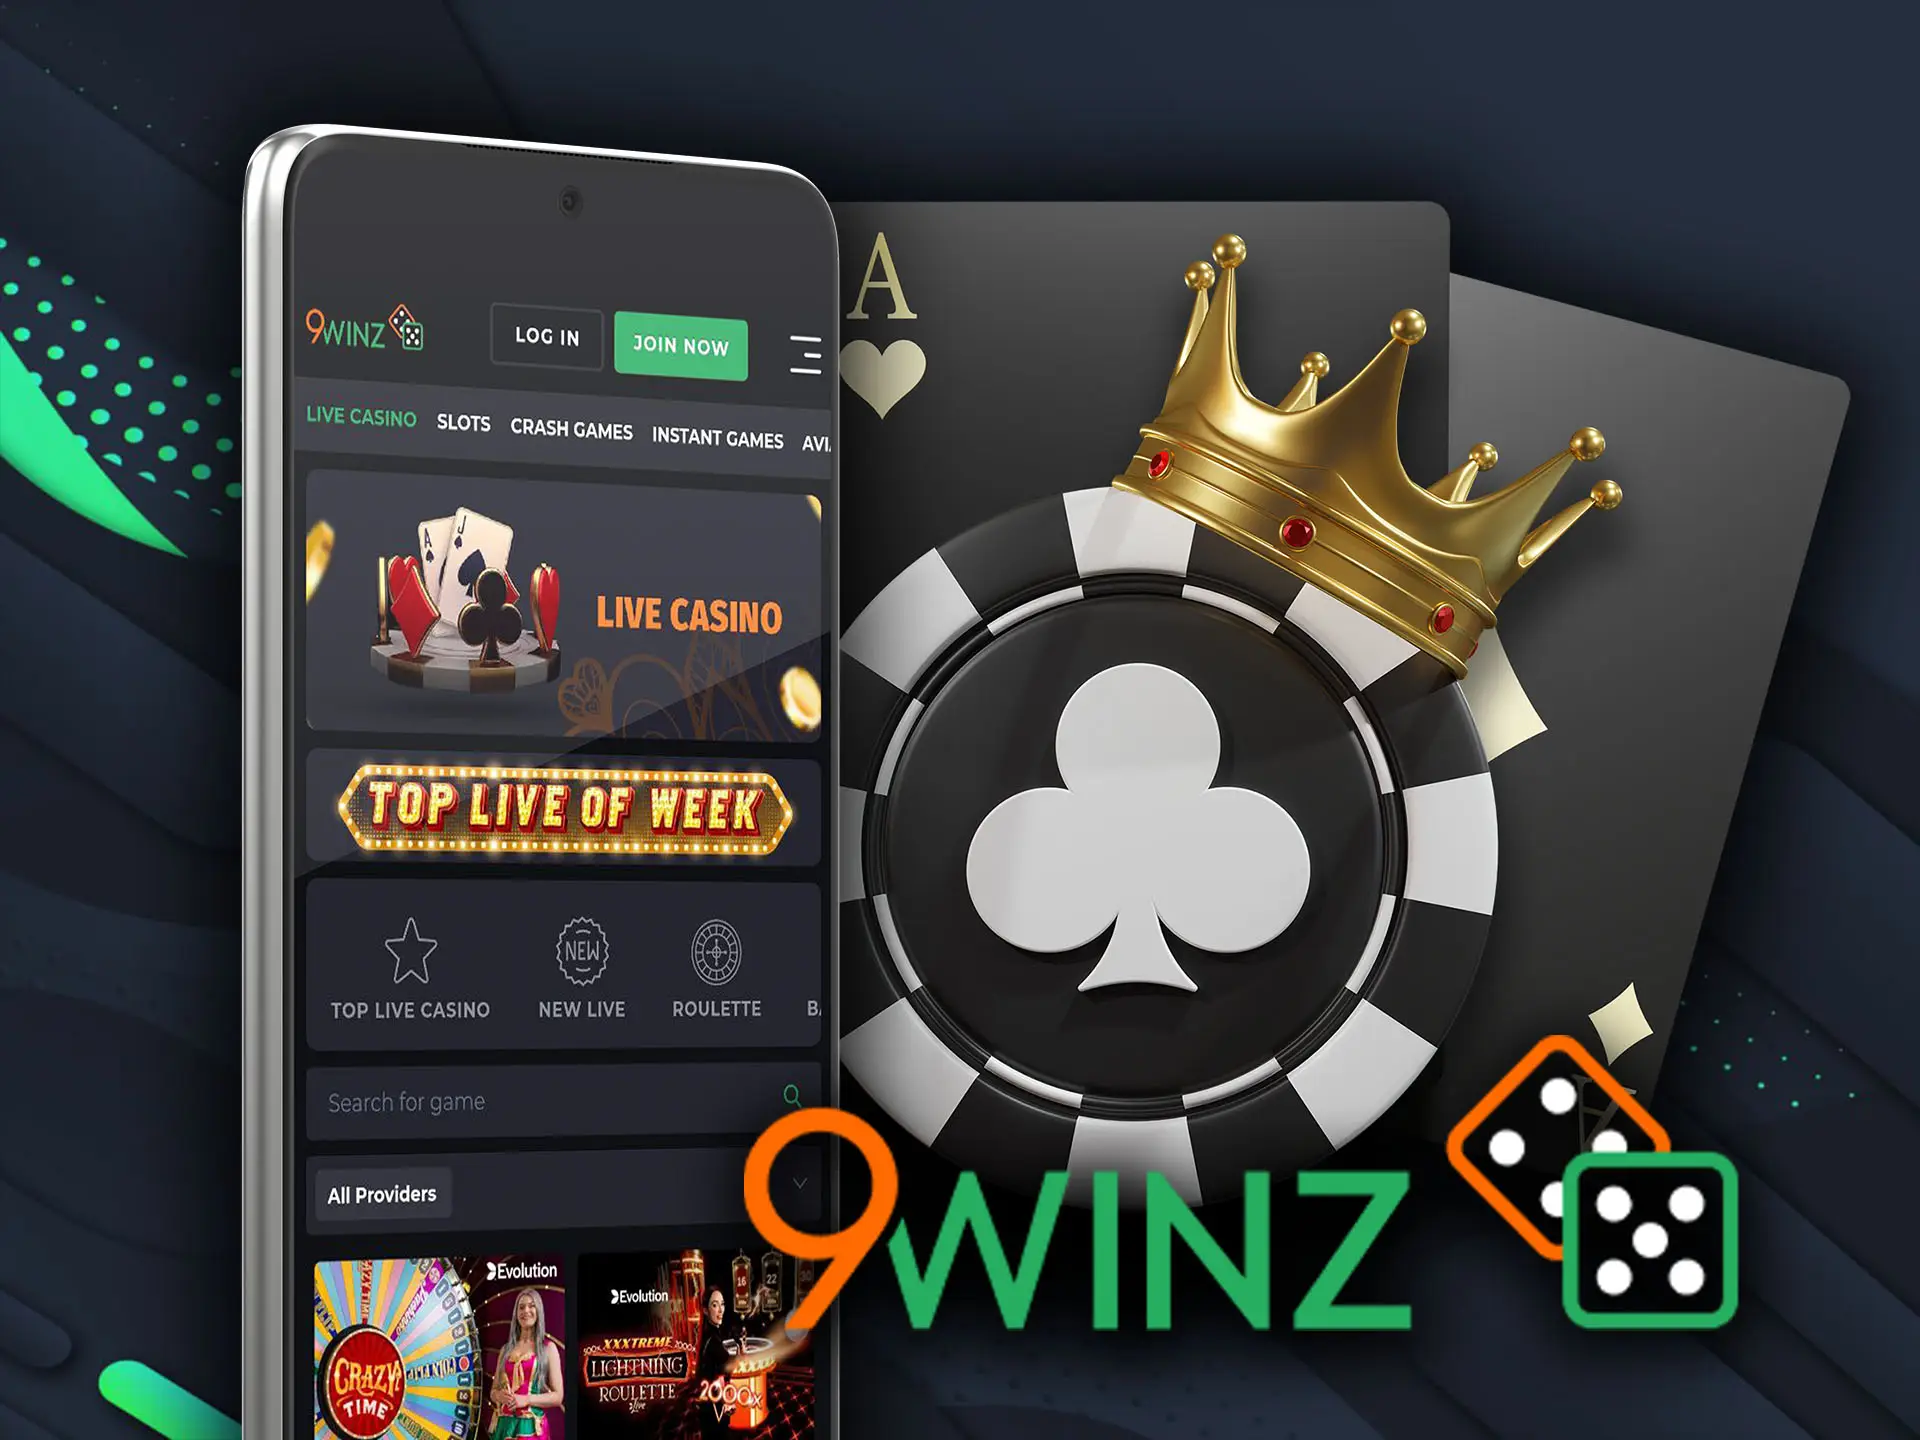 Play different casino games using 9winz app.